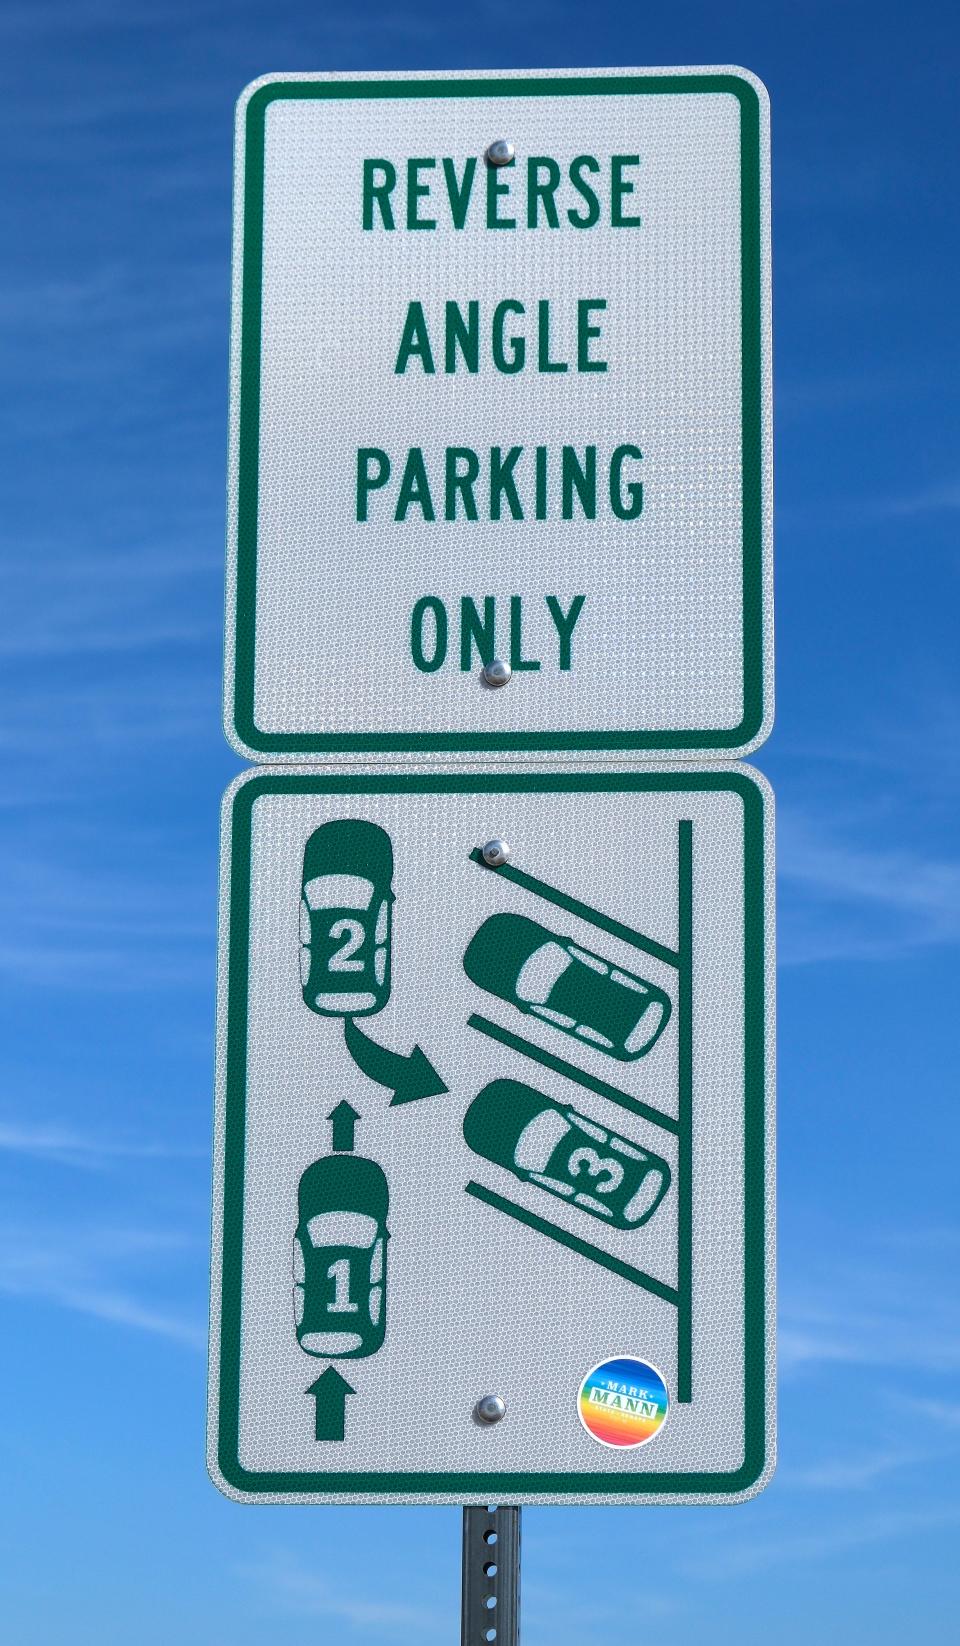 Confusion around reverse-angle parking in OKC's 39th Street District has turned into contention between local businesses and traffic commissioners.